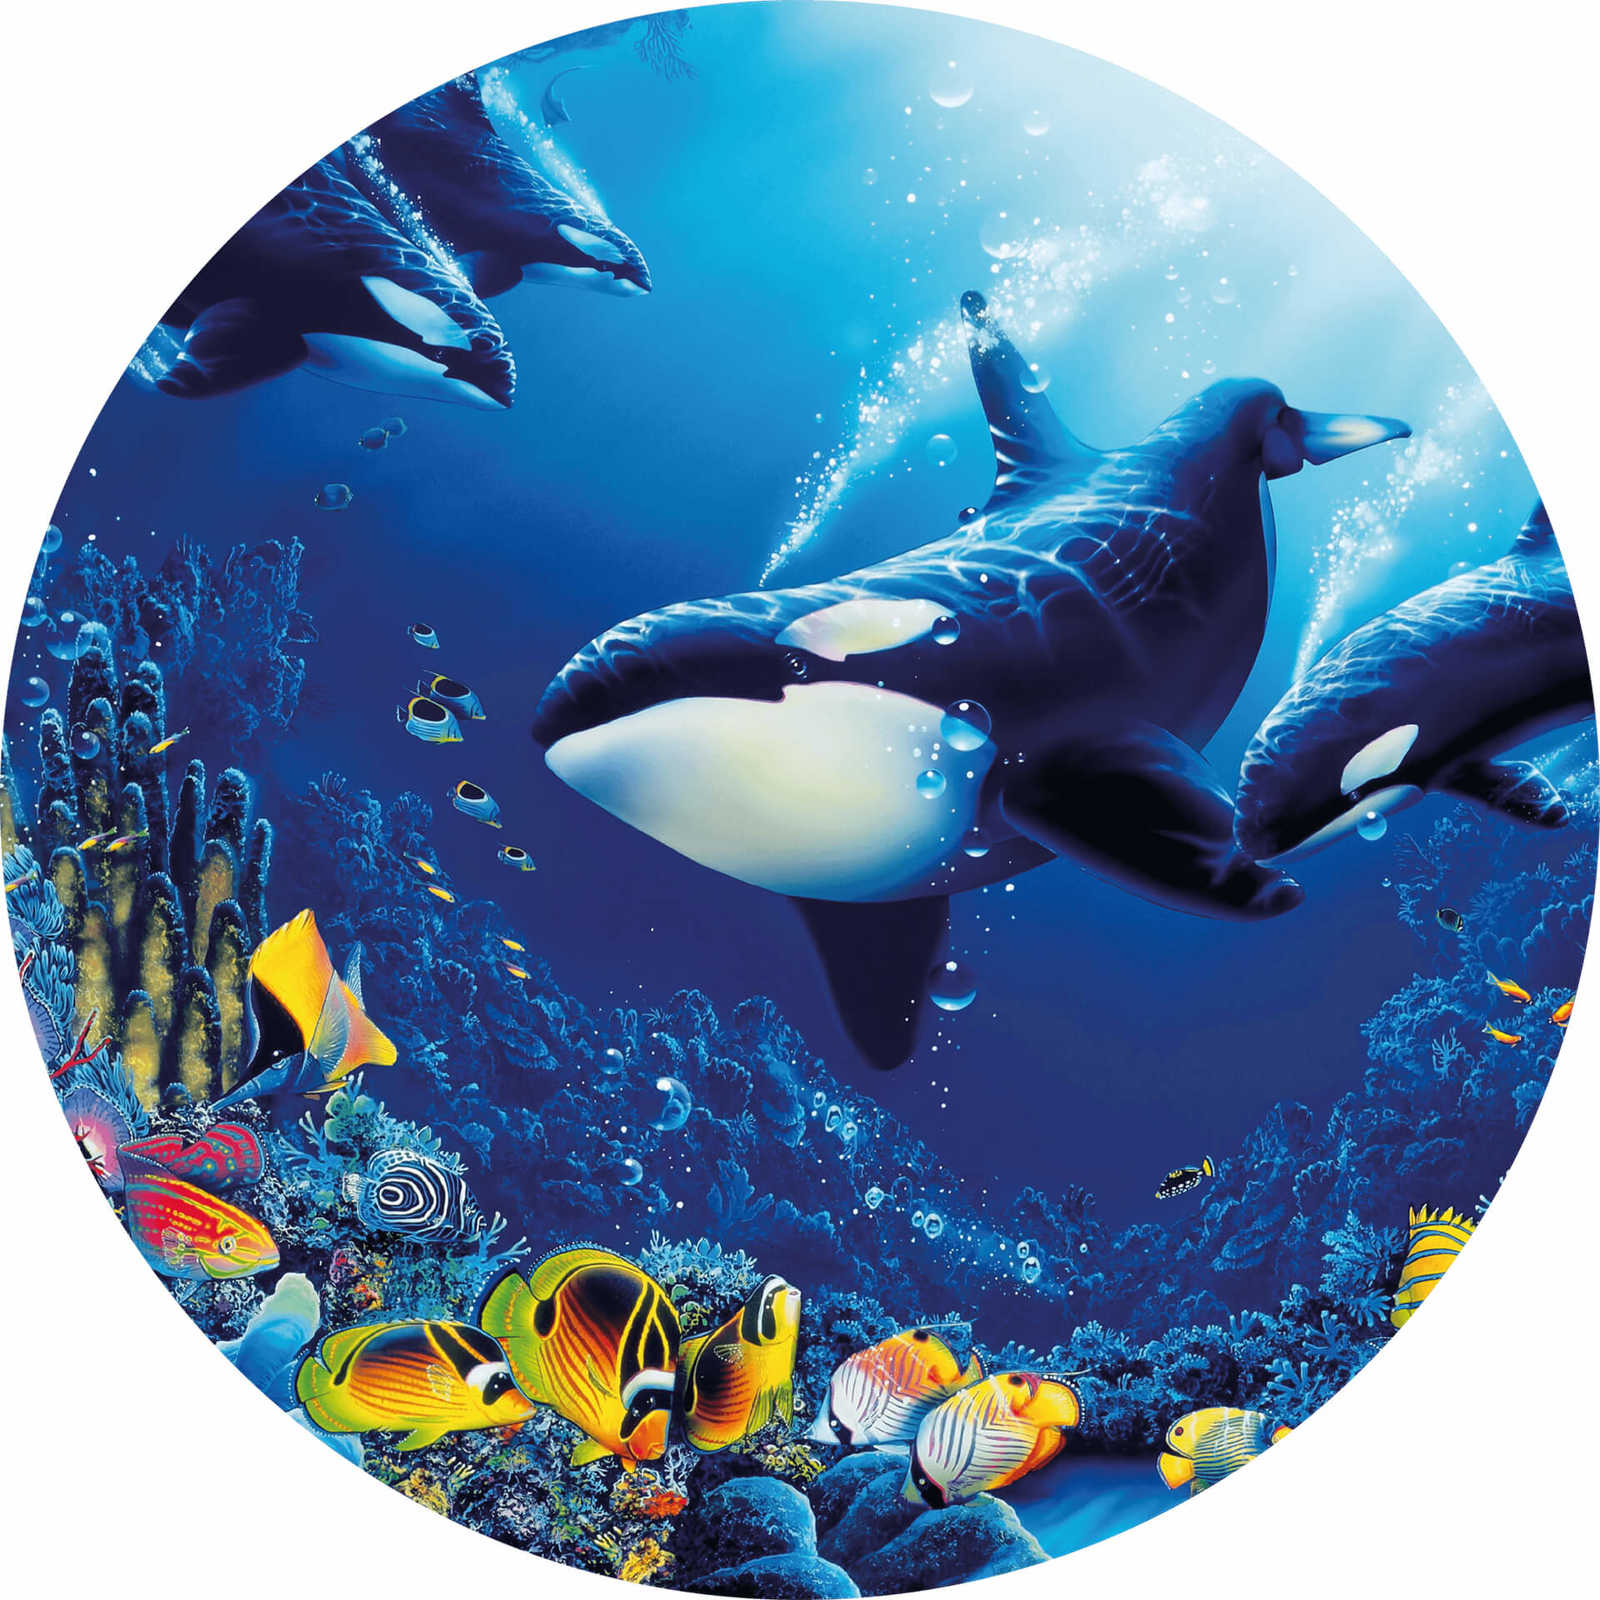         Round mural with underwater world and whales
    